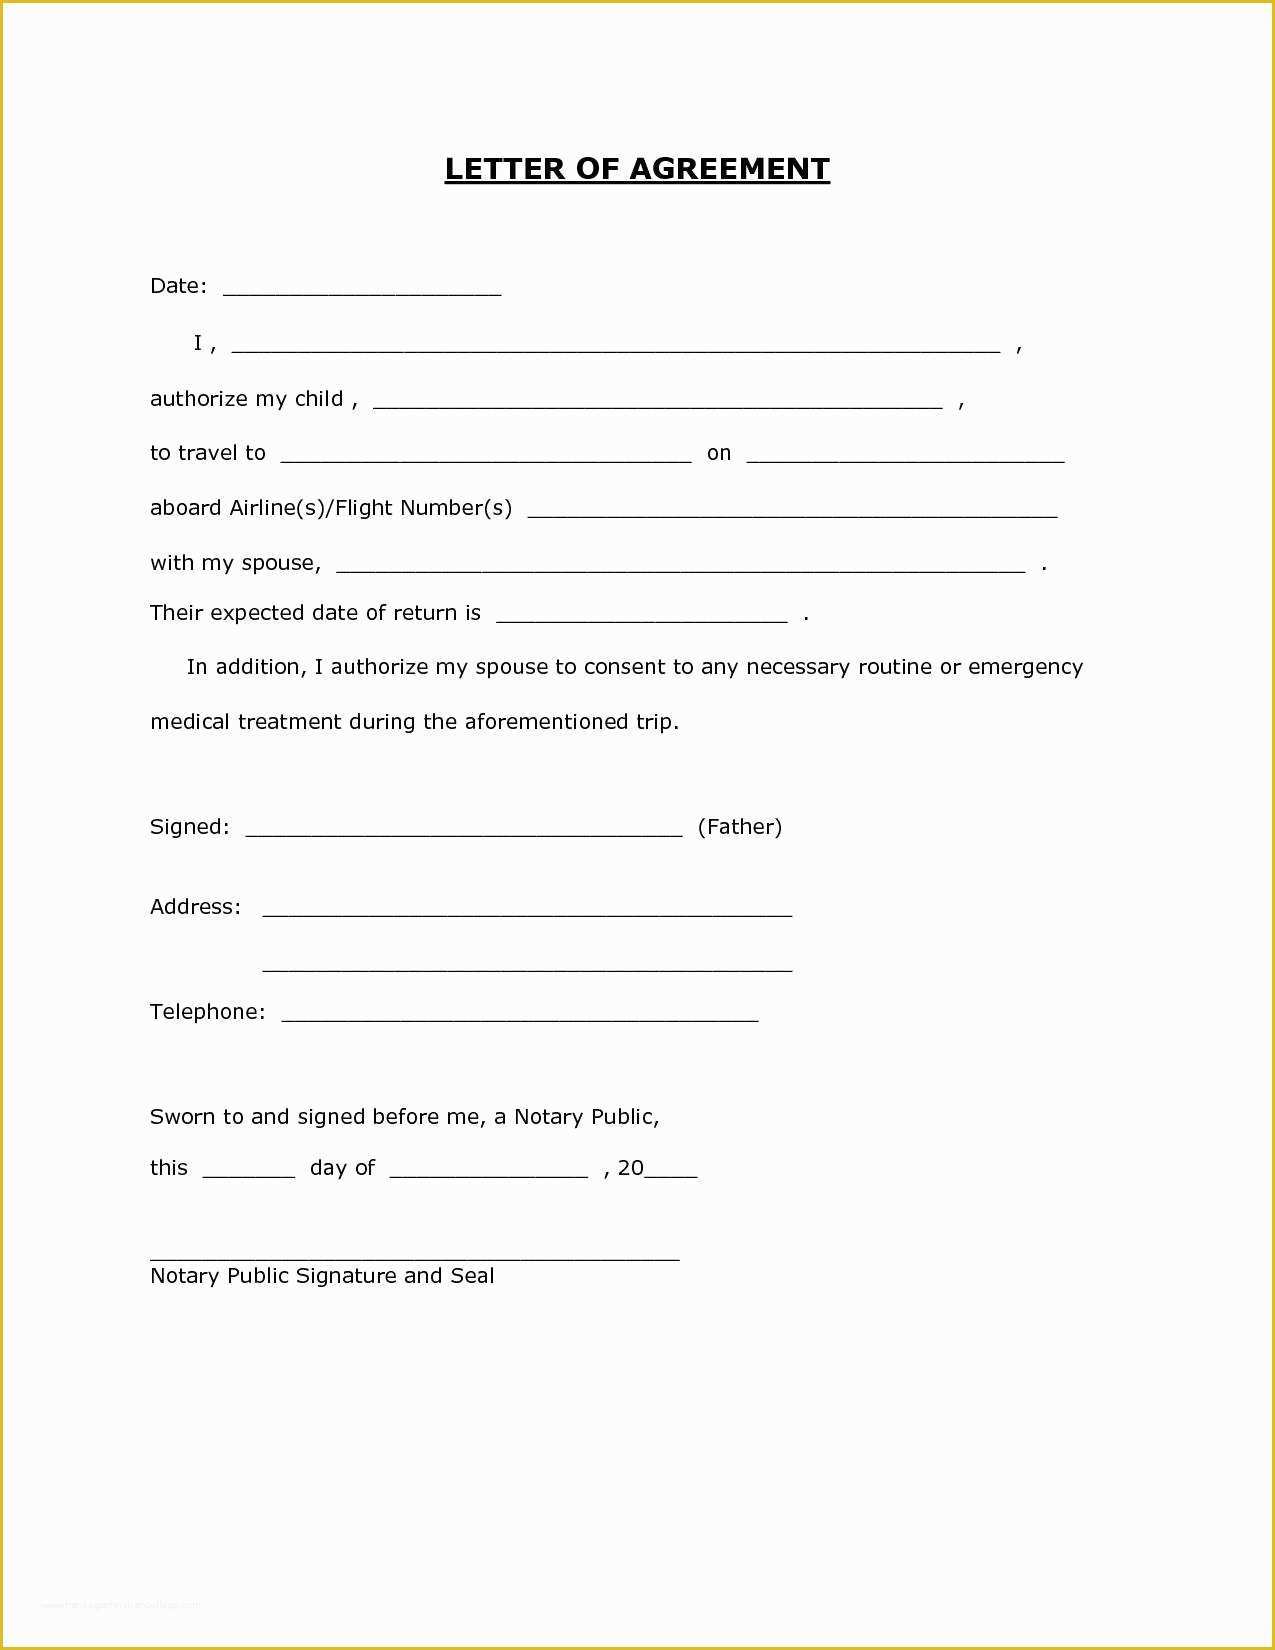 Free Child Travel Consent form Template Of Consent form Template for Travel with Minor C32a5b7b0c50